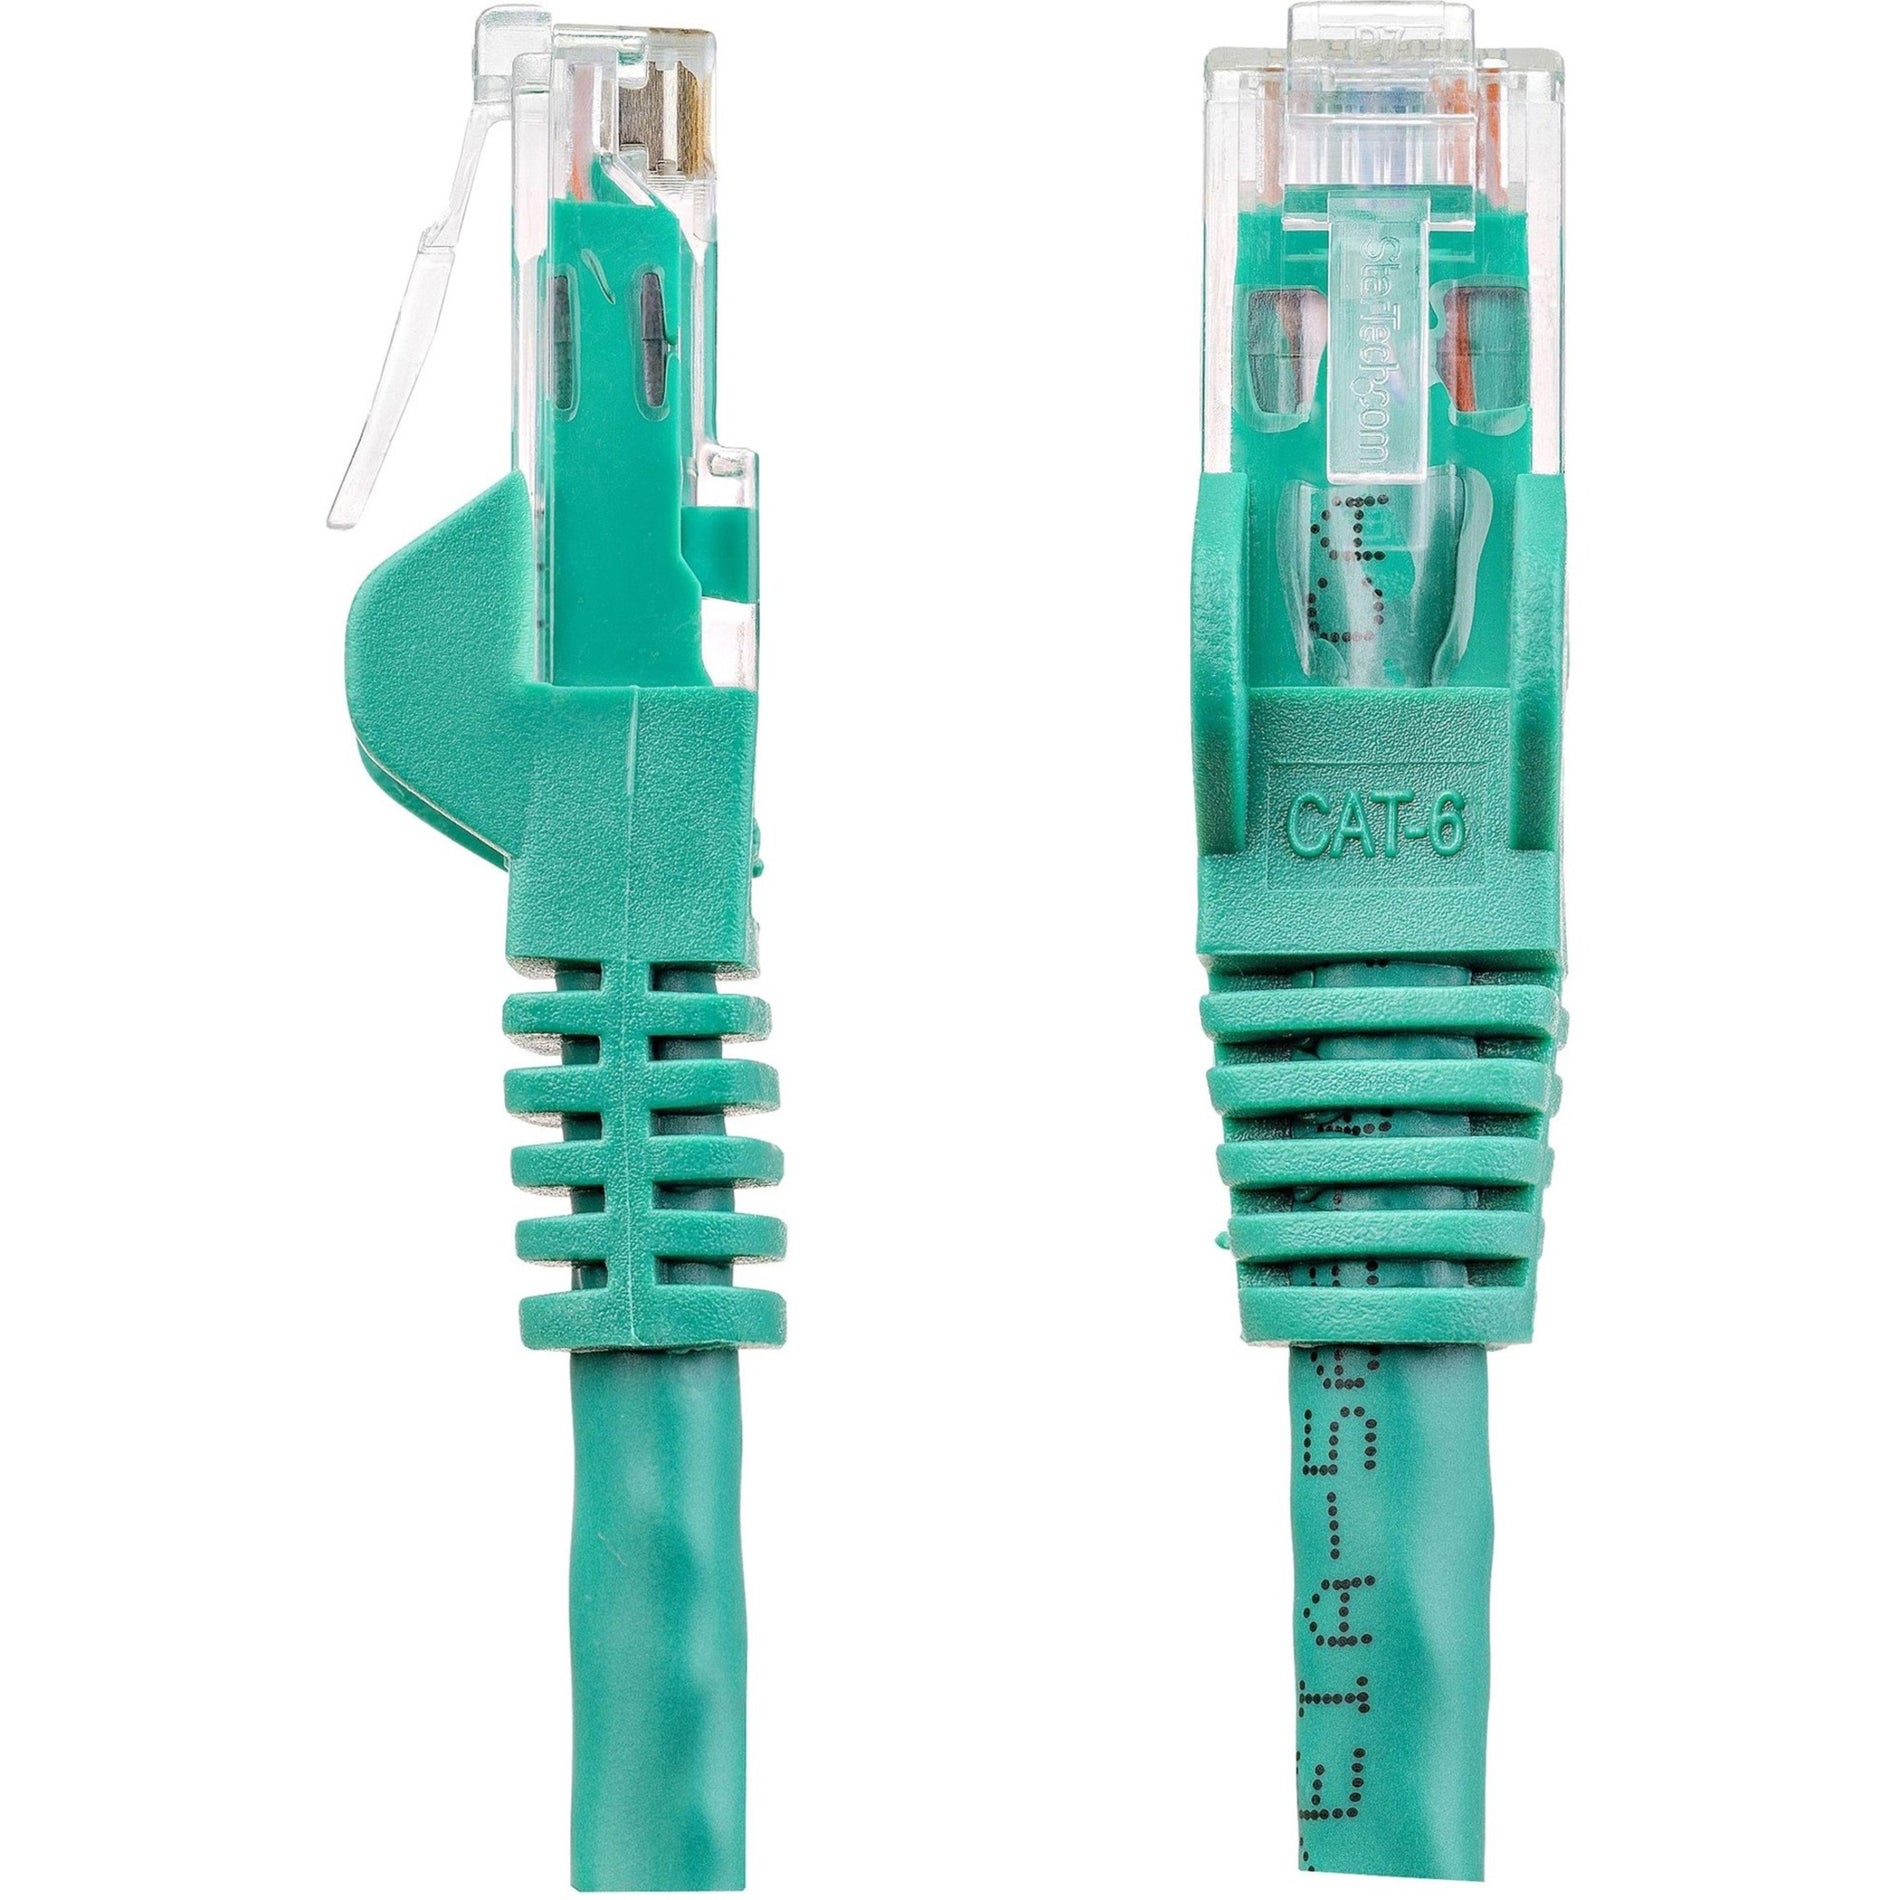 StarTech.com N6PATCH9GN Cat6 Patch Cable, 9 ft Green Ethernet Cable, Snagless RJ45 Connectors